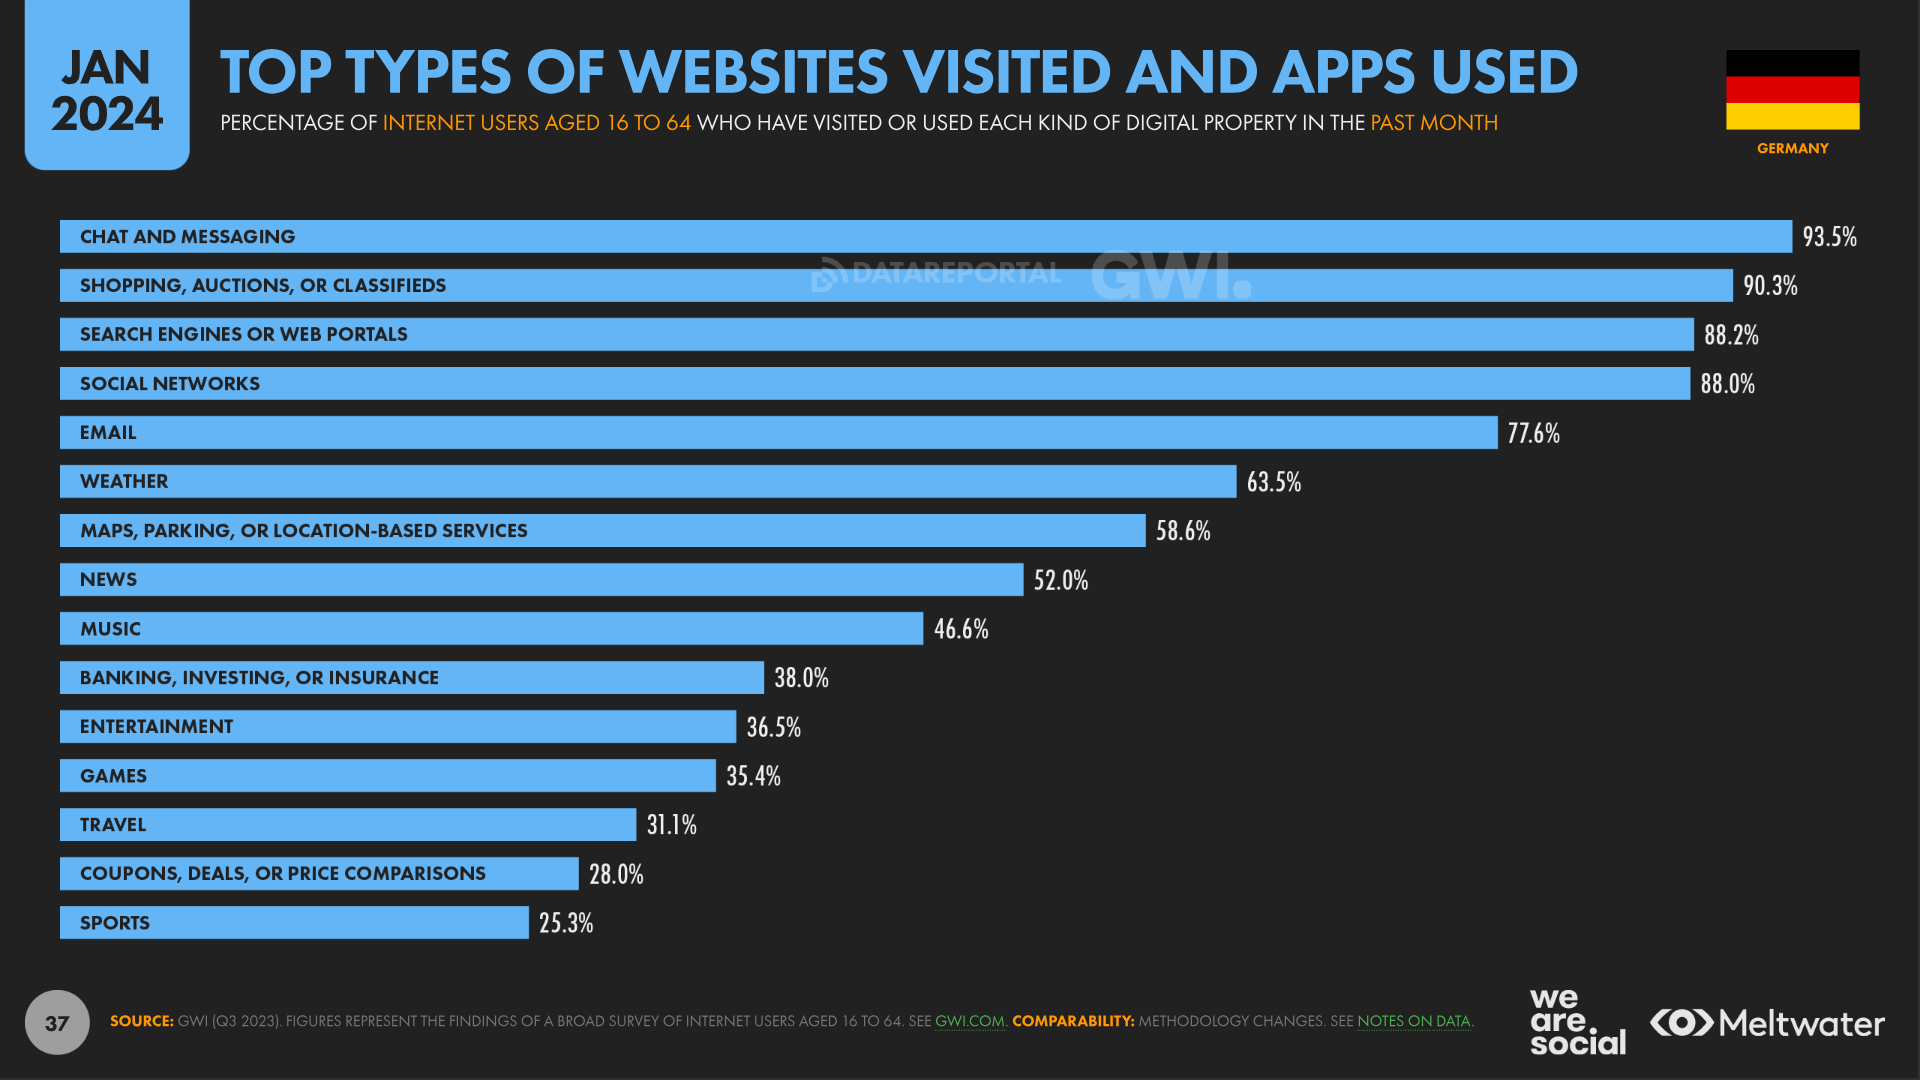 top types of websites visited and apps used Germany 2024